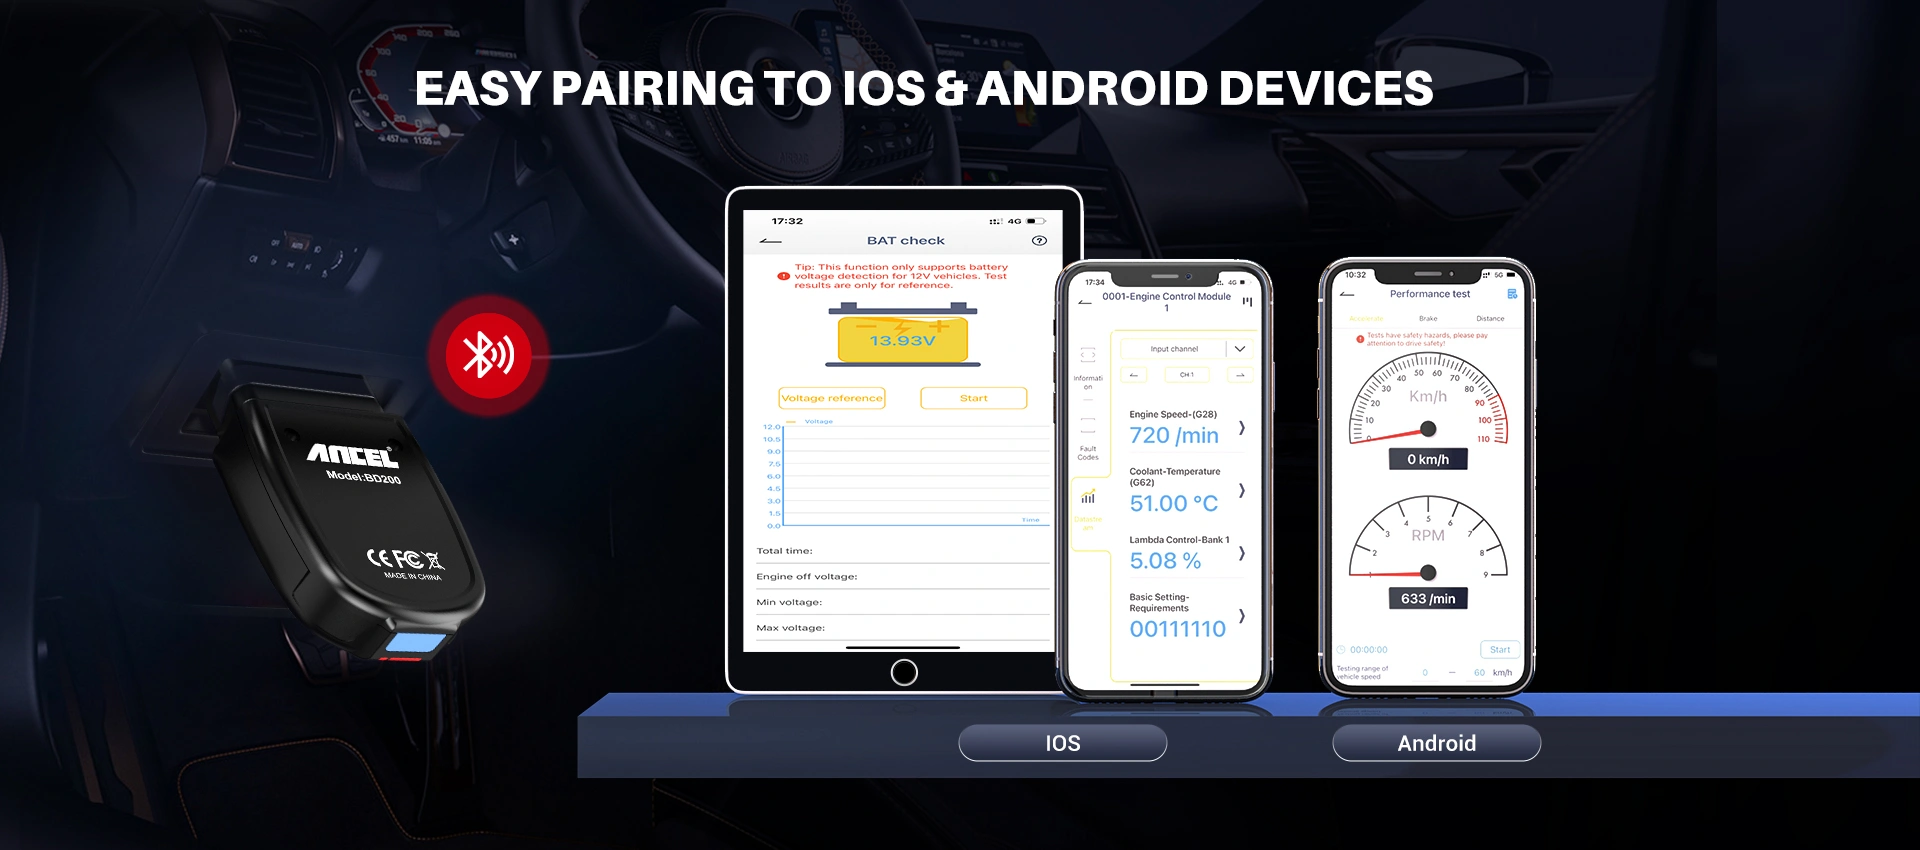 Easy Pairing to IOS & Android Devices